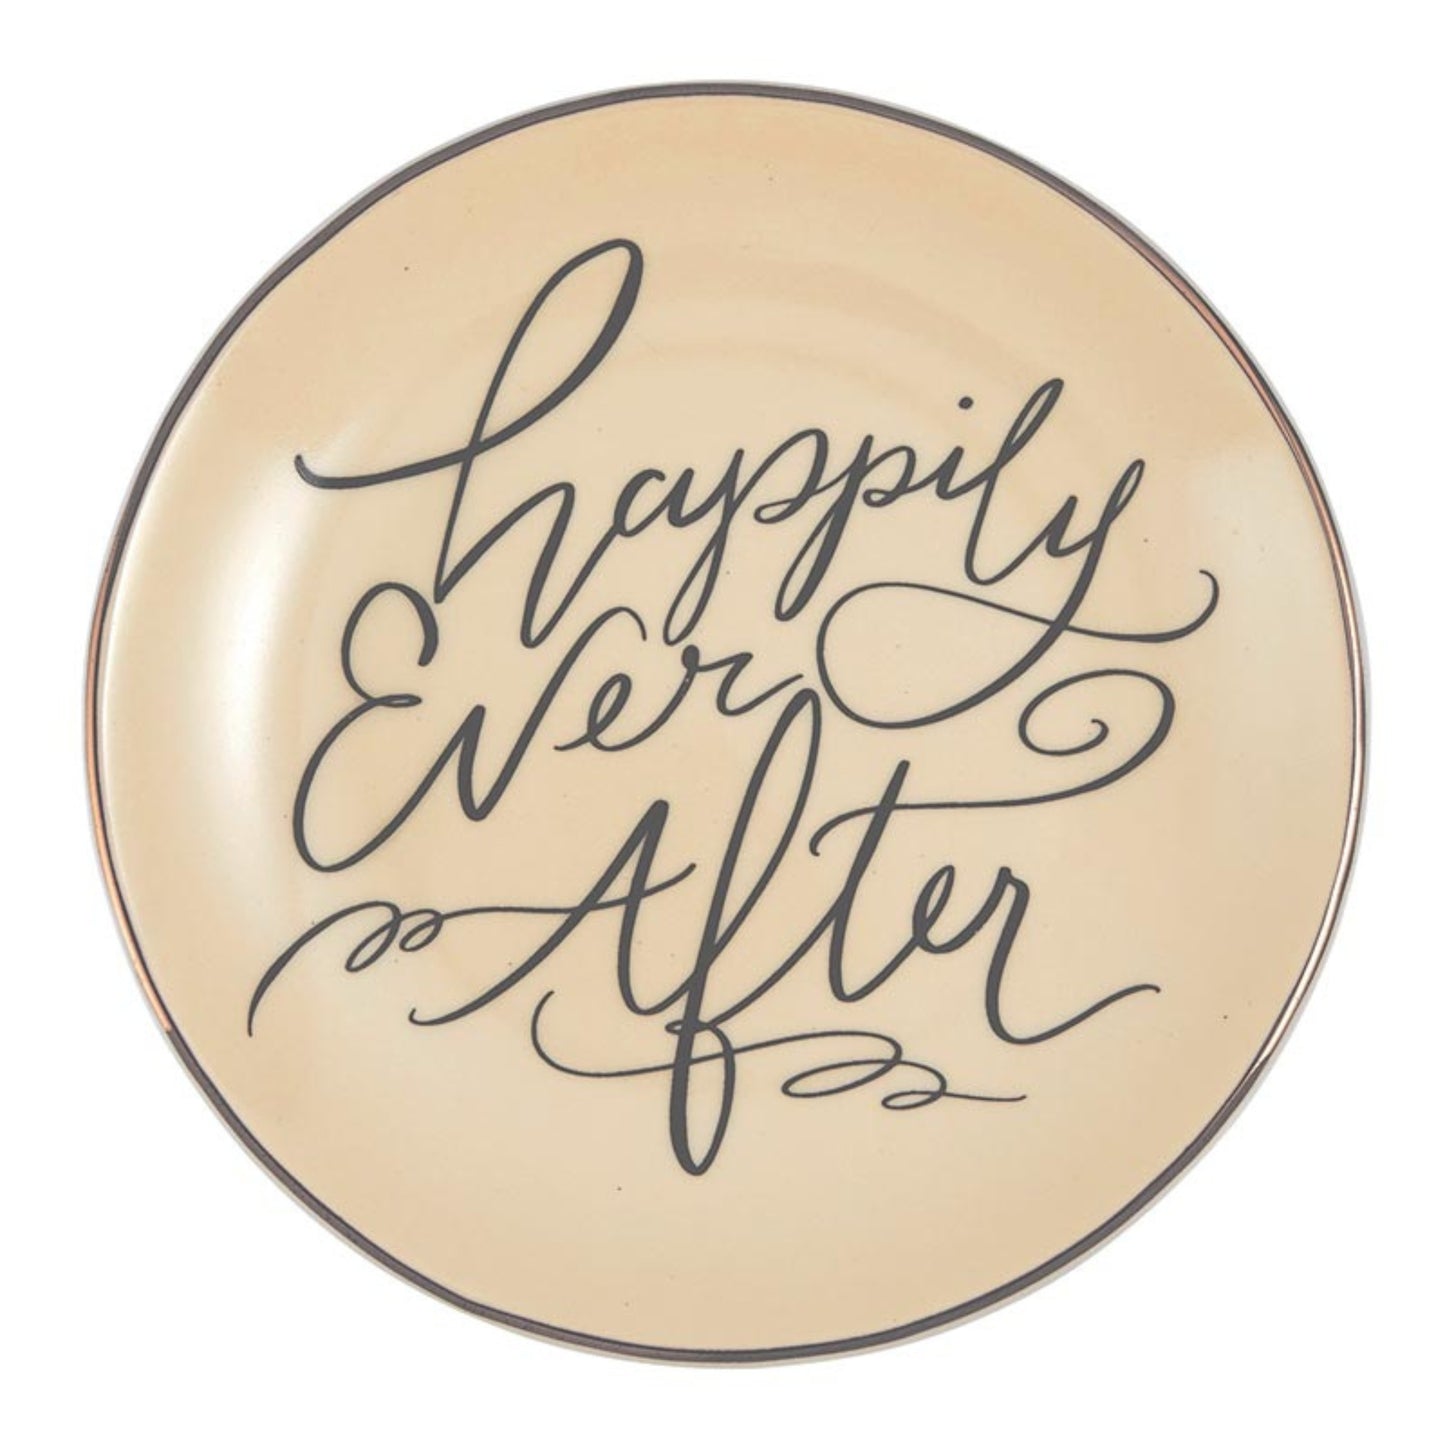 Happily Ever After Ceramic Trinket Tray - Wedding Gift - Anniversary Gift - Jewelry Dish - Ring Holder | oak7west.com